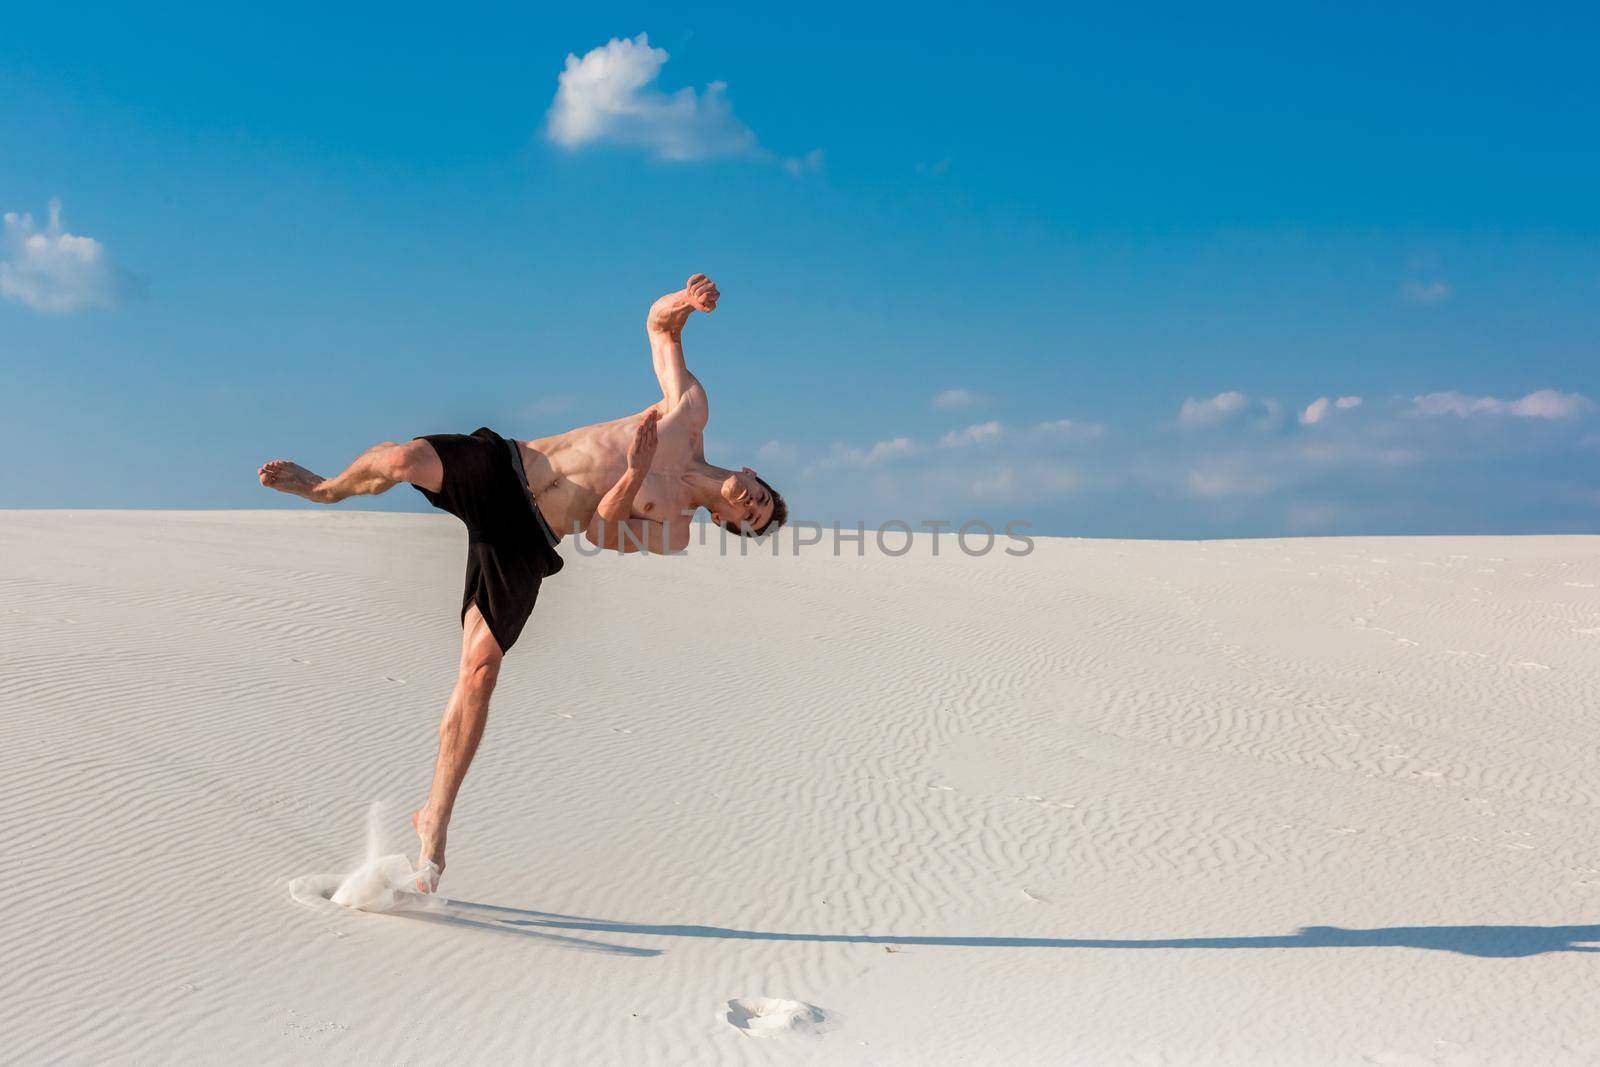 Portrait of young parkour man doing flip or somersault on the sand. Freezed moment of beginning doing bounce.